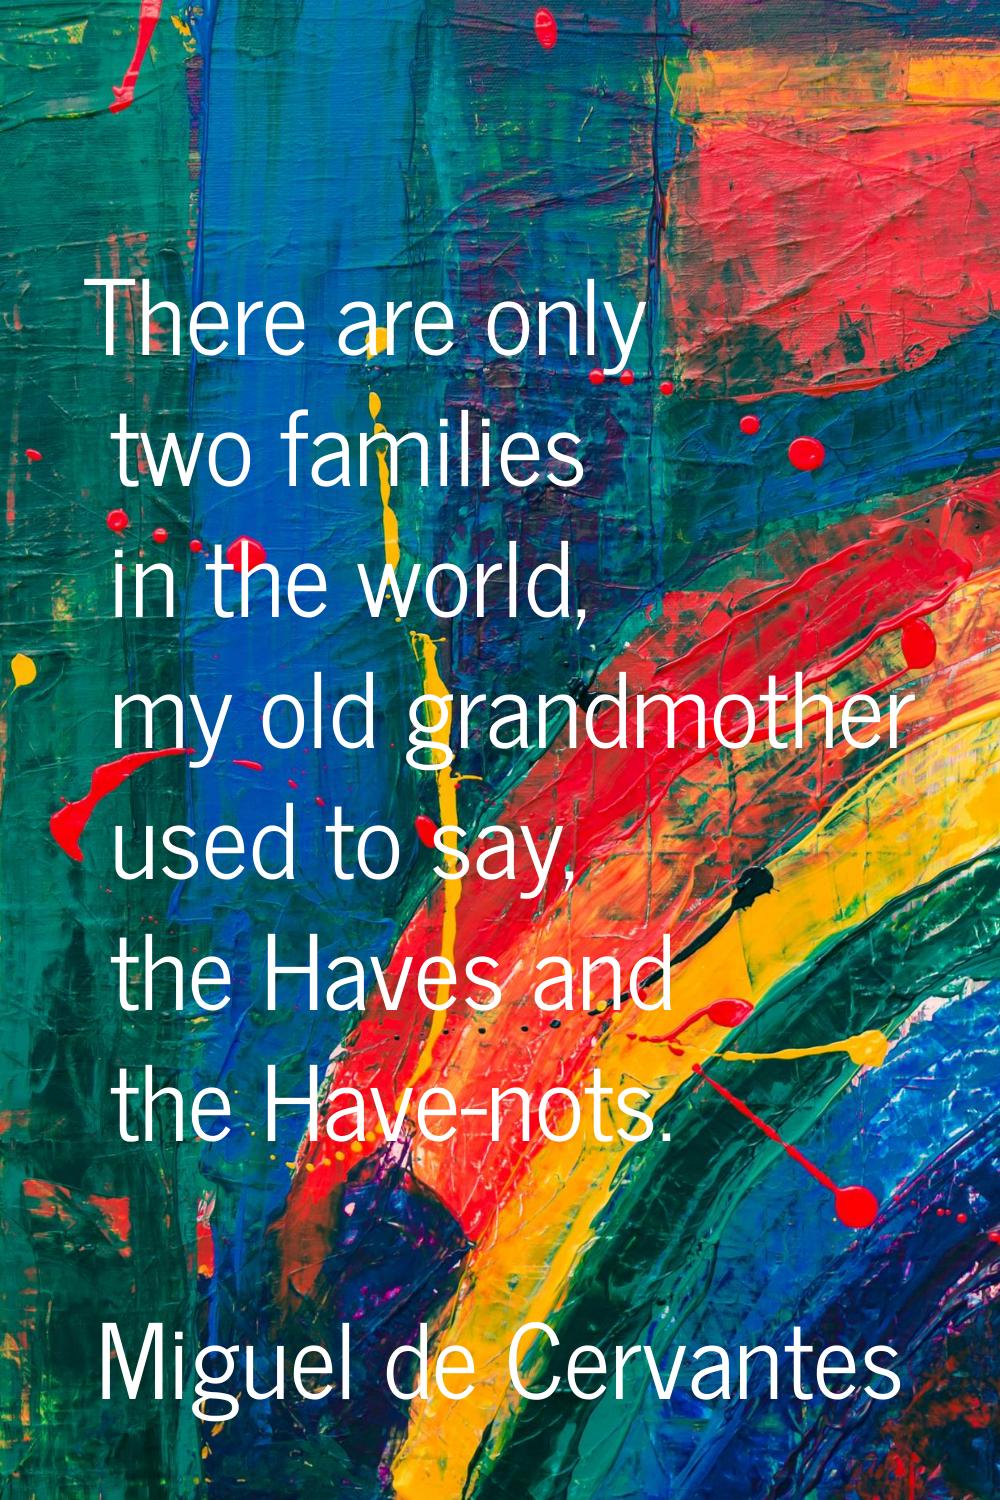 There are only two families in the world, my old grandmother used to say, the Haves and the Have-no